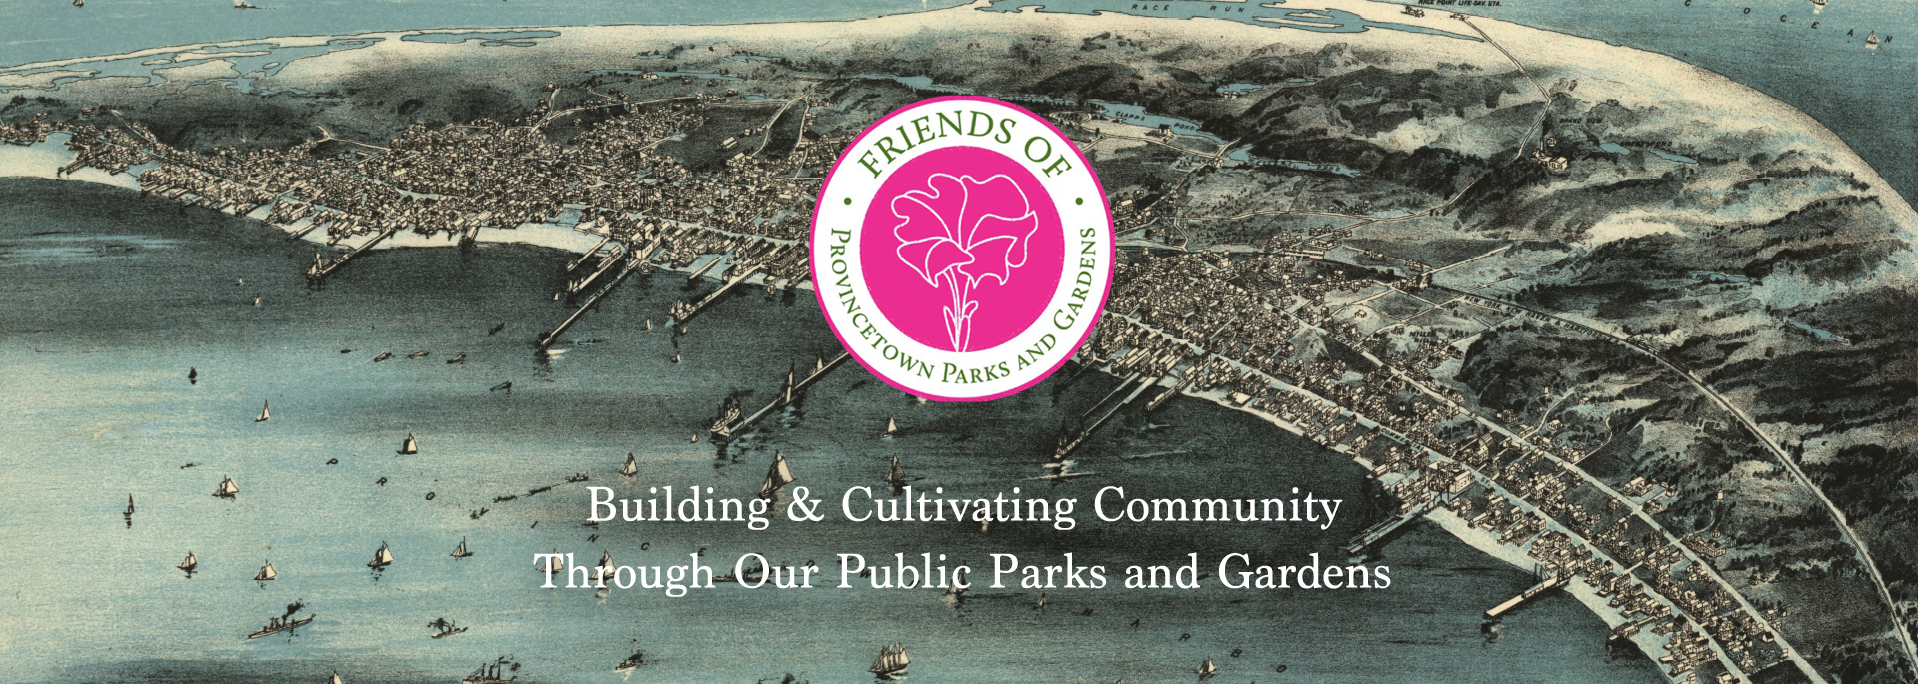 Building & Cultivating Community Through Our Public Parks and Gardens